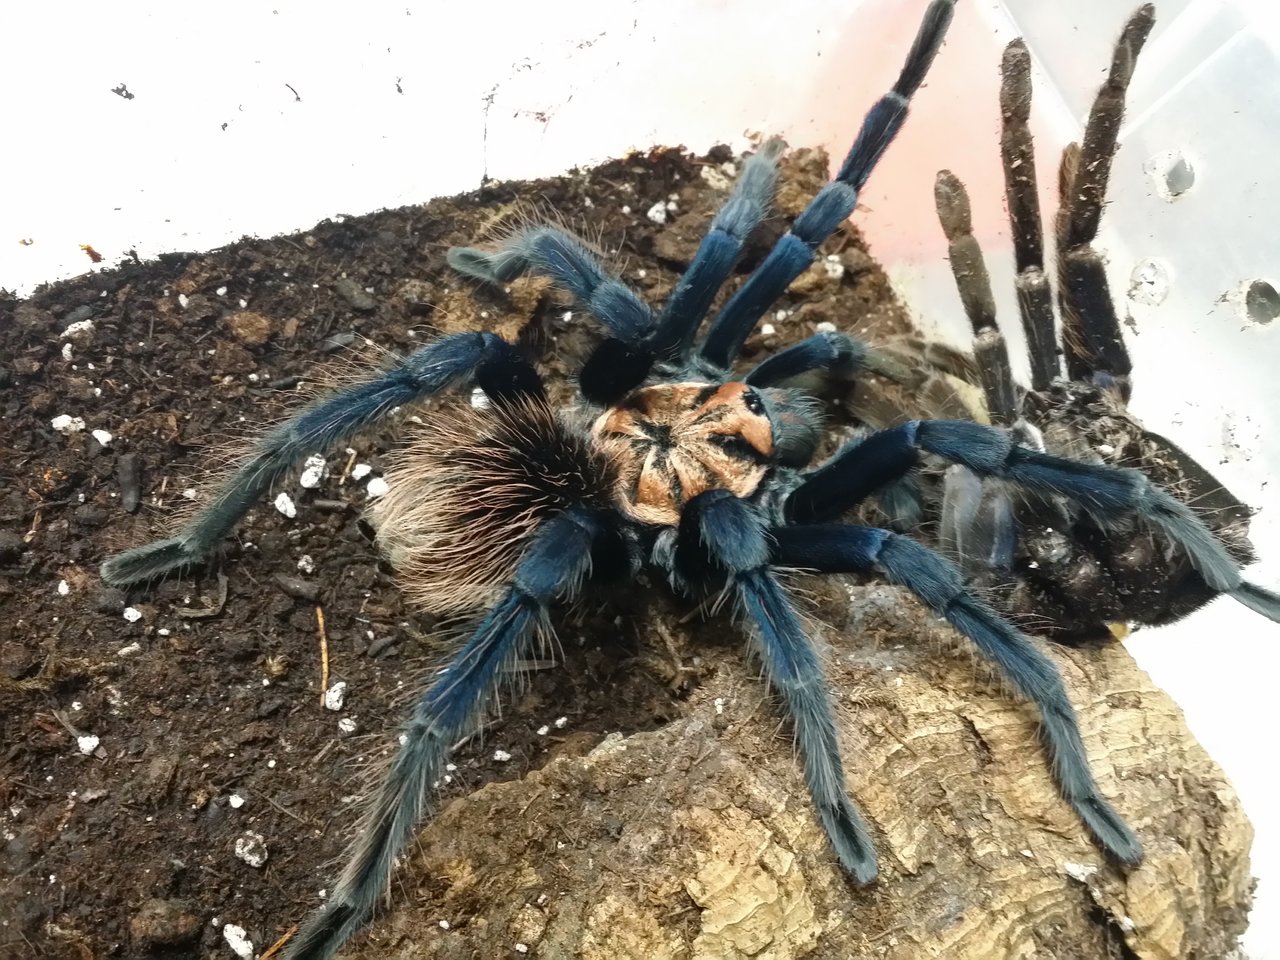 Xenesthis sp "Blue" MM